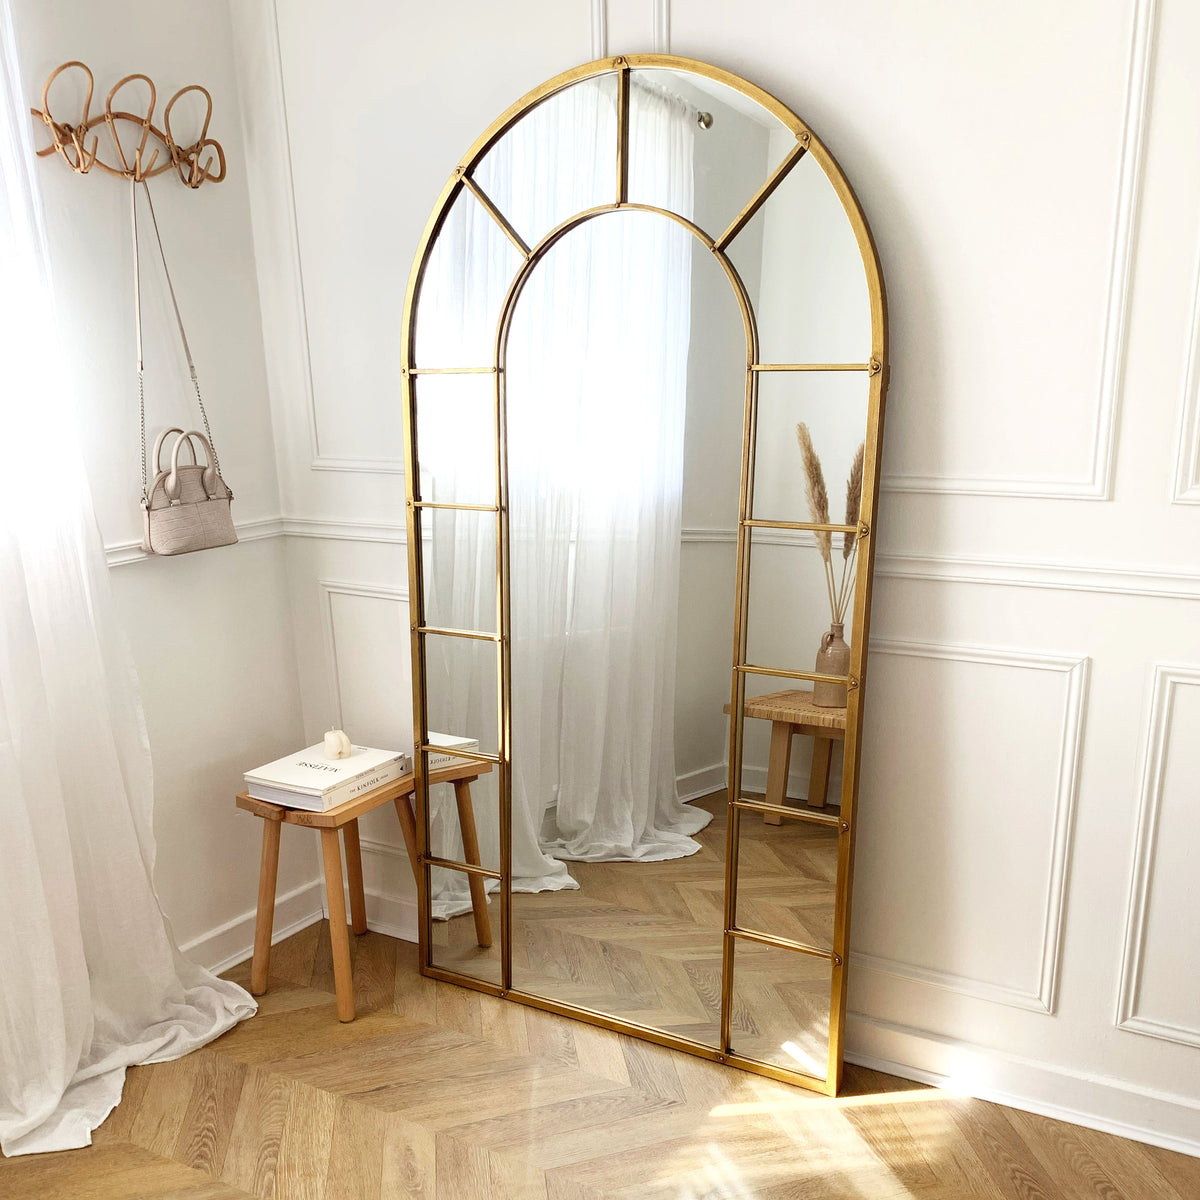 Gold industrial arched full length metal mirror leaning against wall